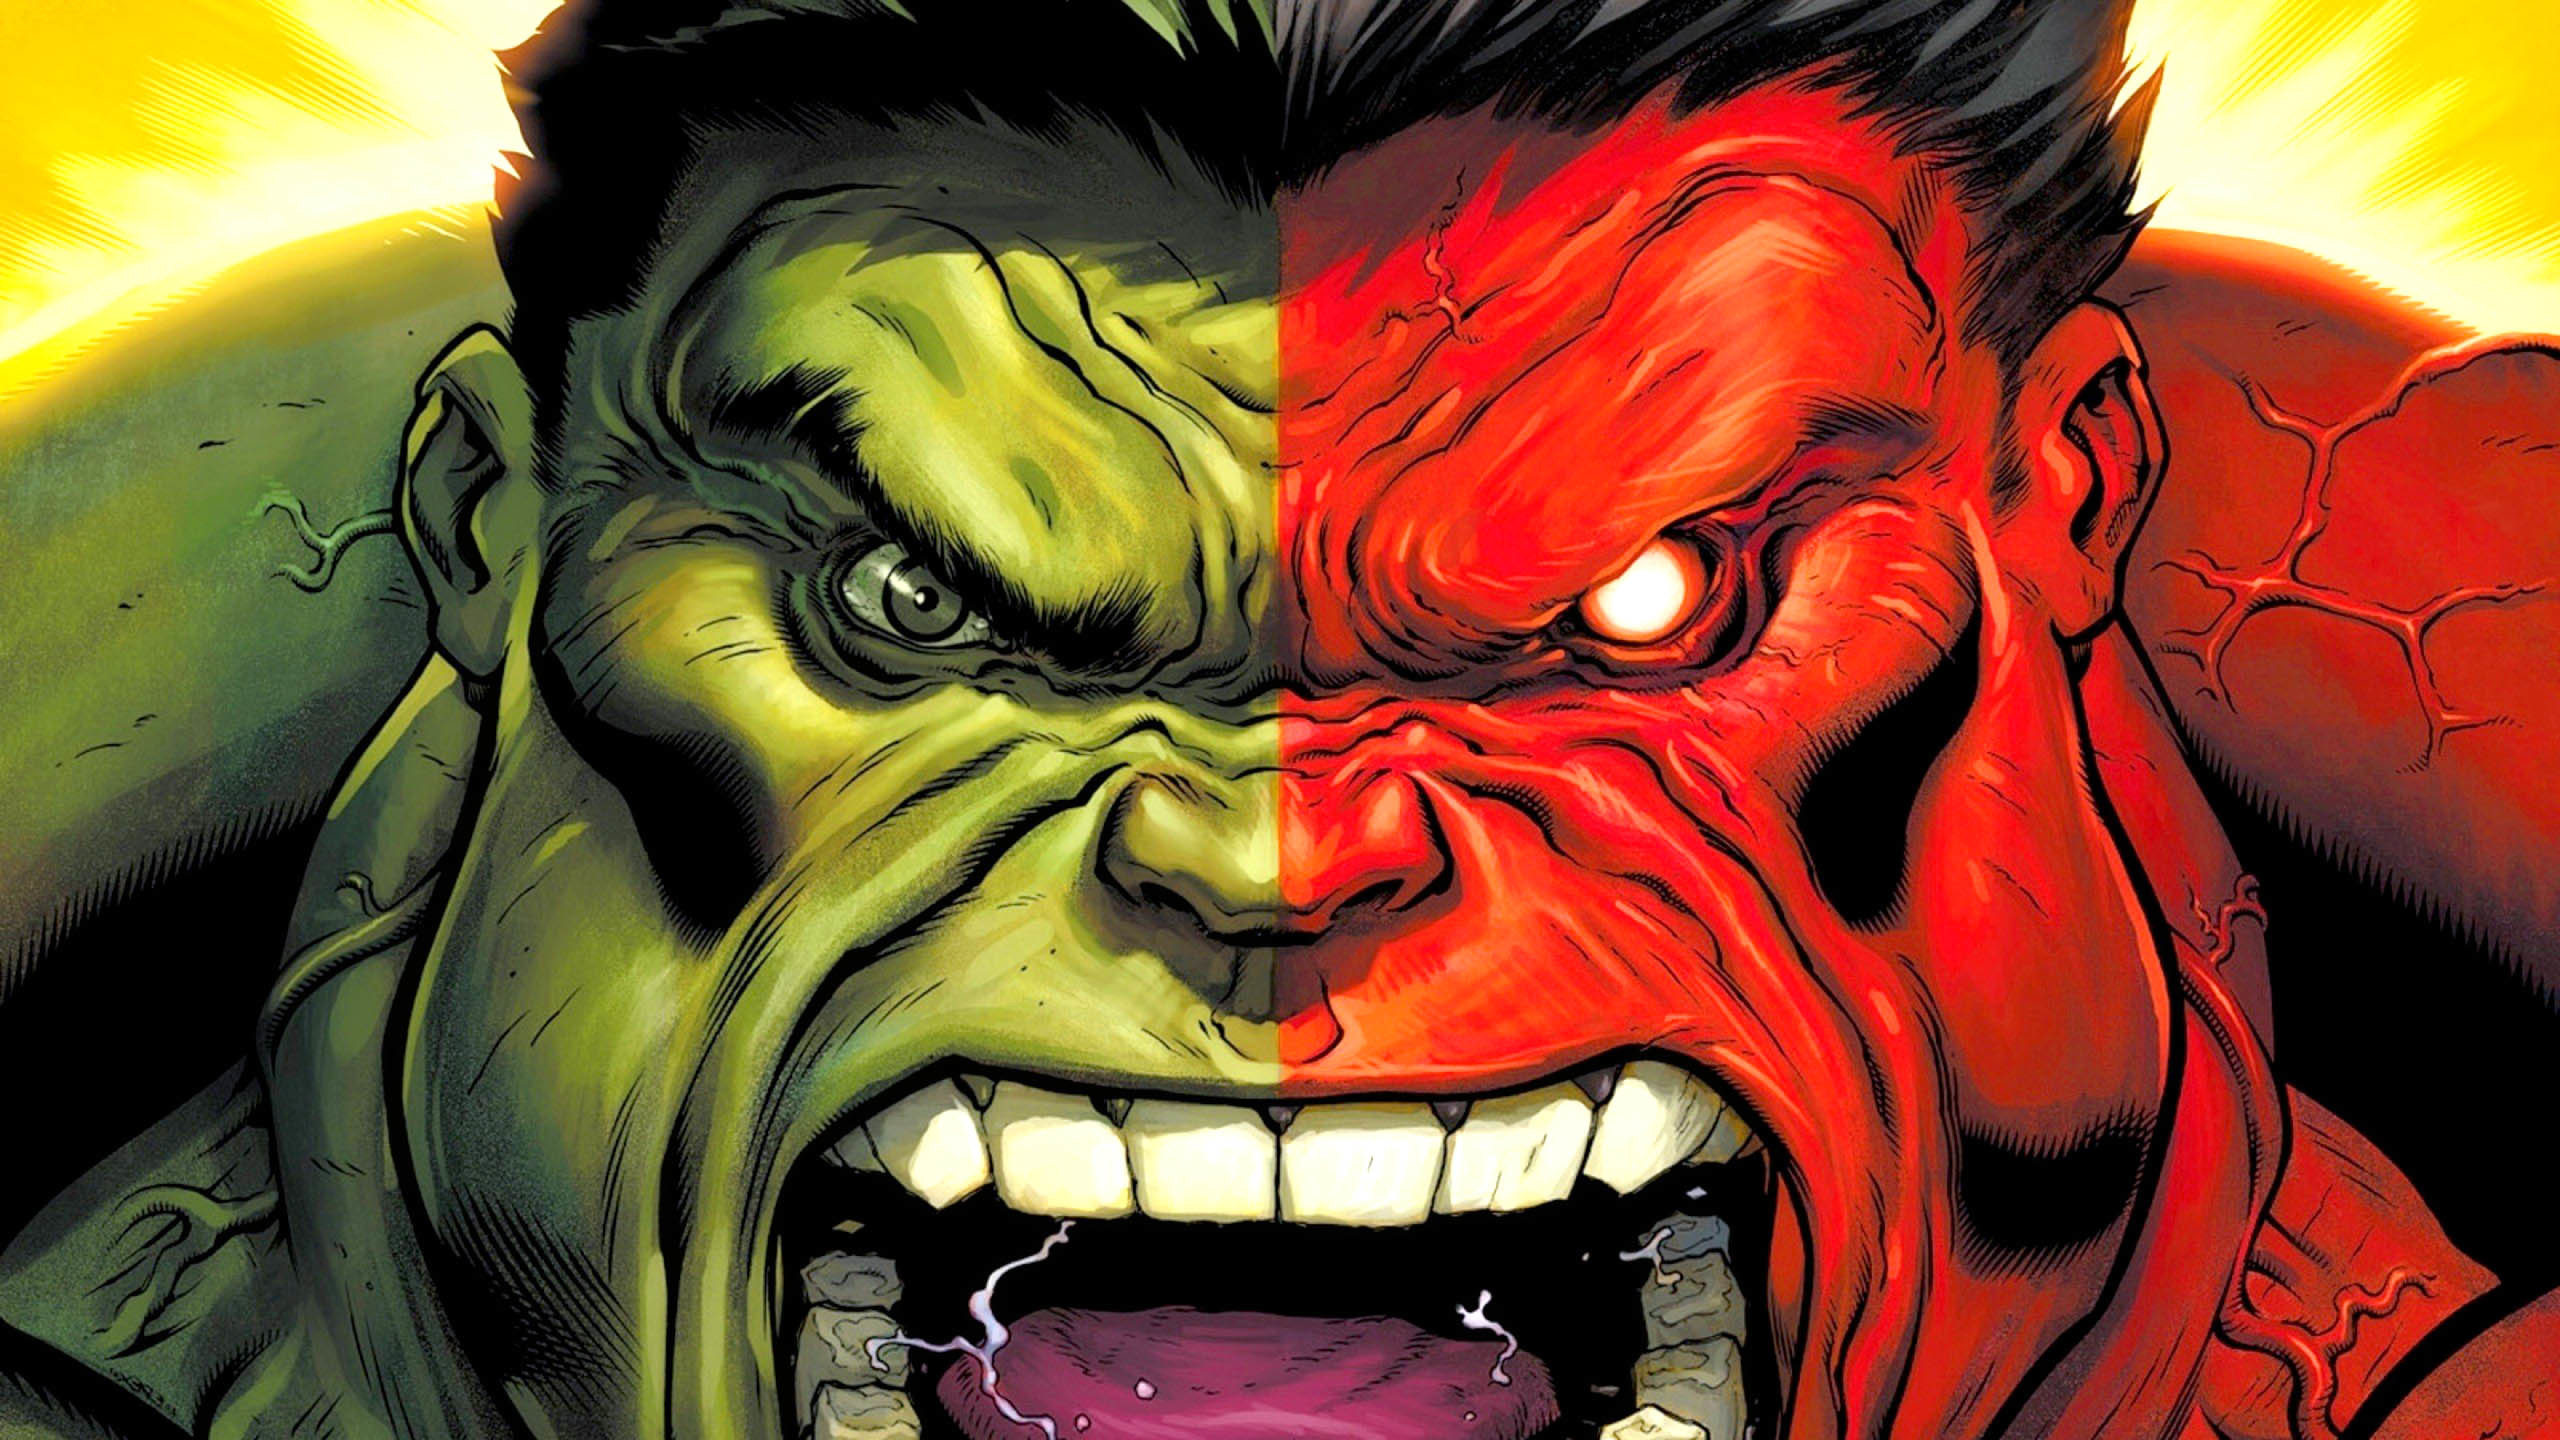 2560x1440 Explore Wallpapers Android, Incredible Hulk, and more!